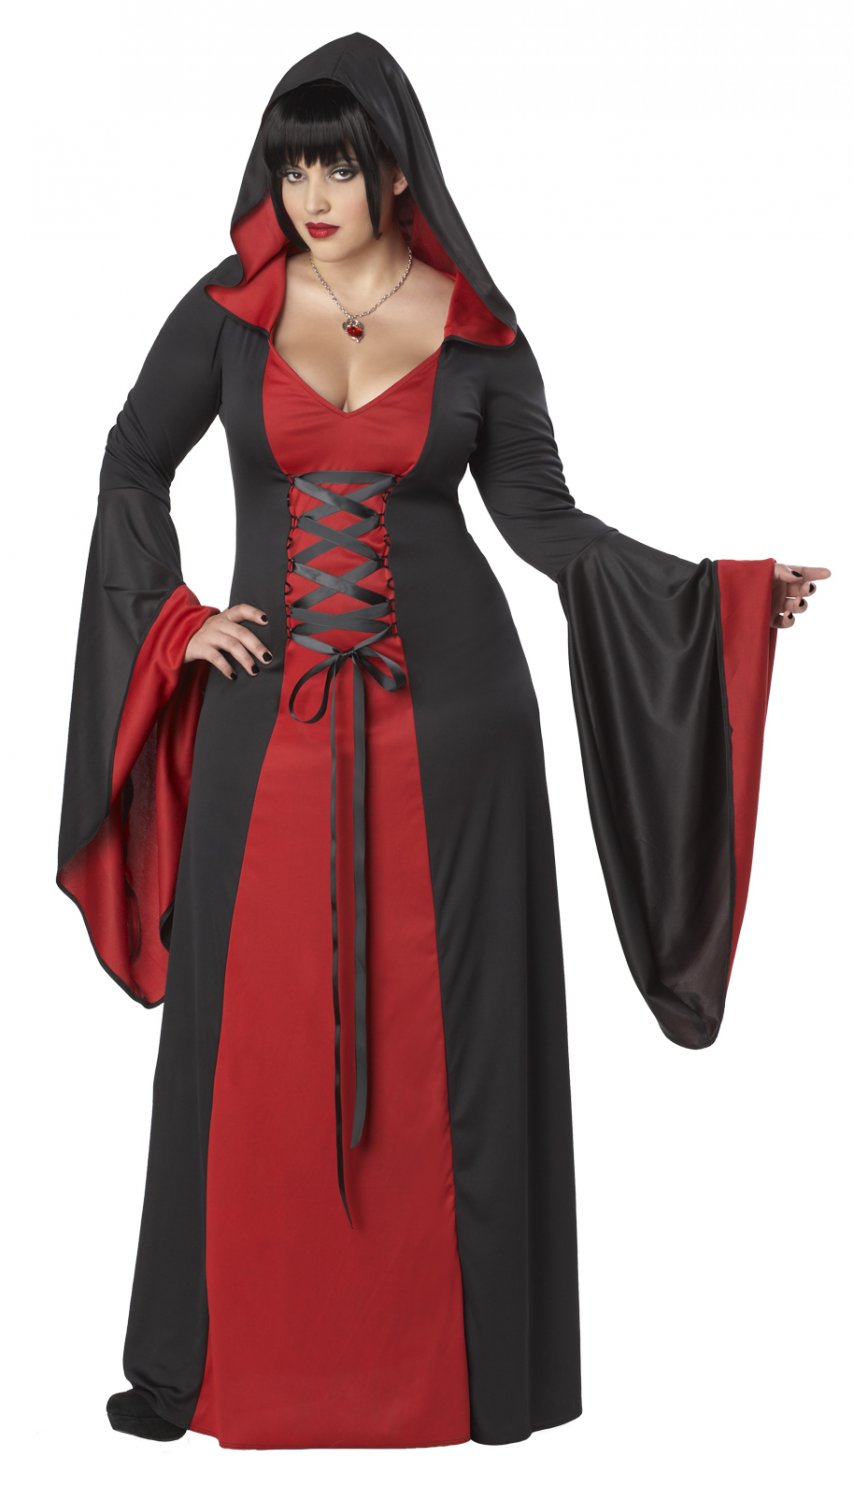 Deluxe Hooded Robe Gothic Adult Plus Size Costume 2x Large 01703